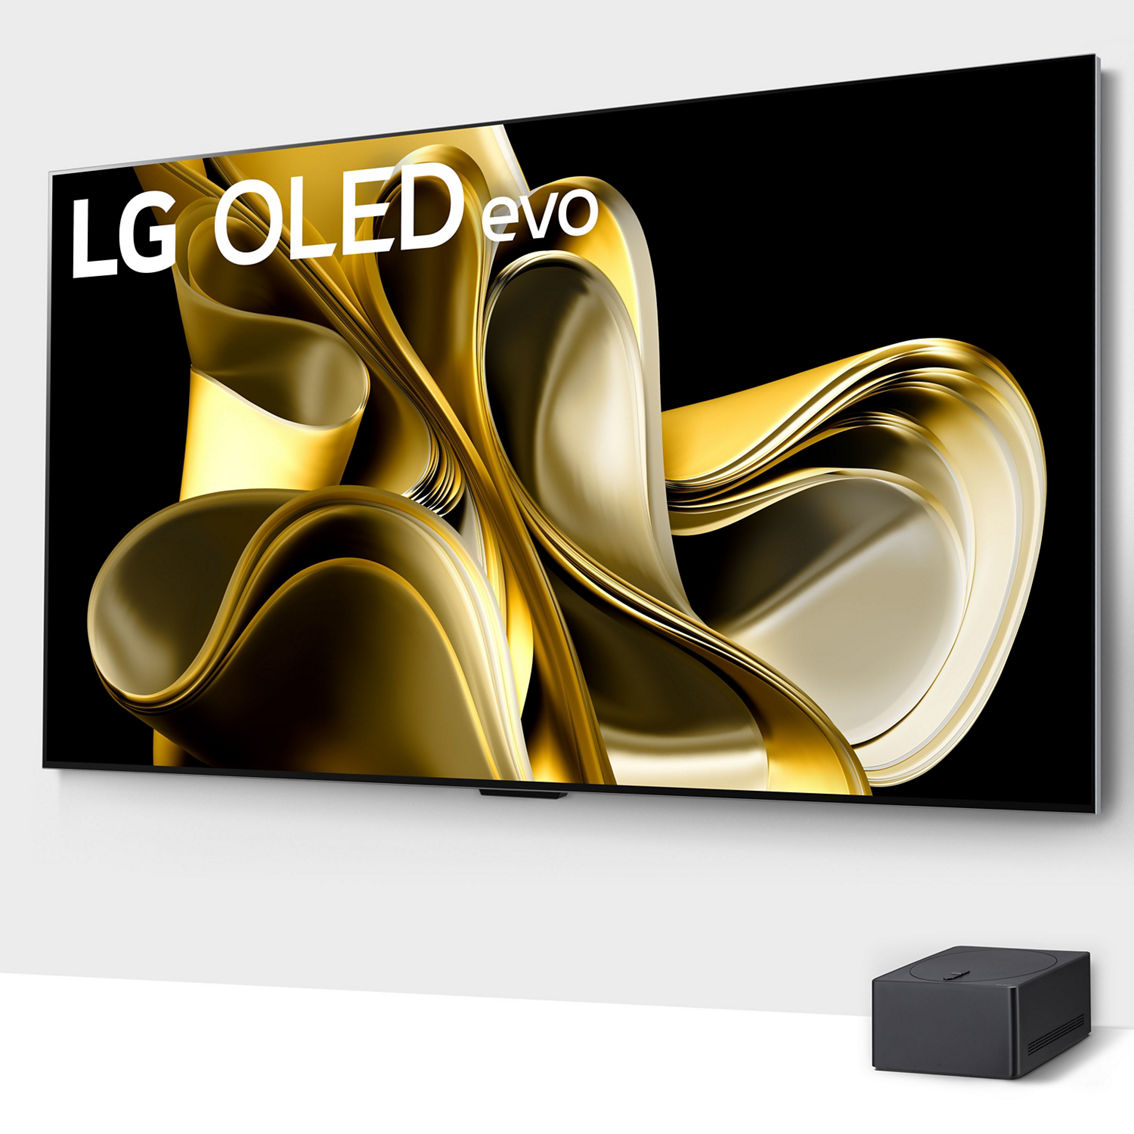 LG 83 in. OLED M3 Evo Smart TV with Wireless 4K Connectivity OLED83M3PUA - Image 3 of 10